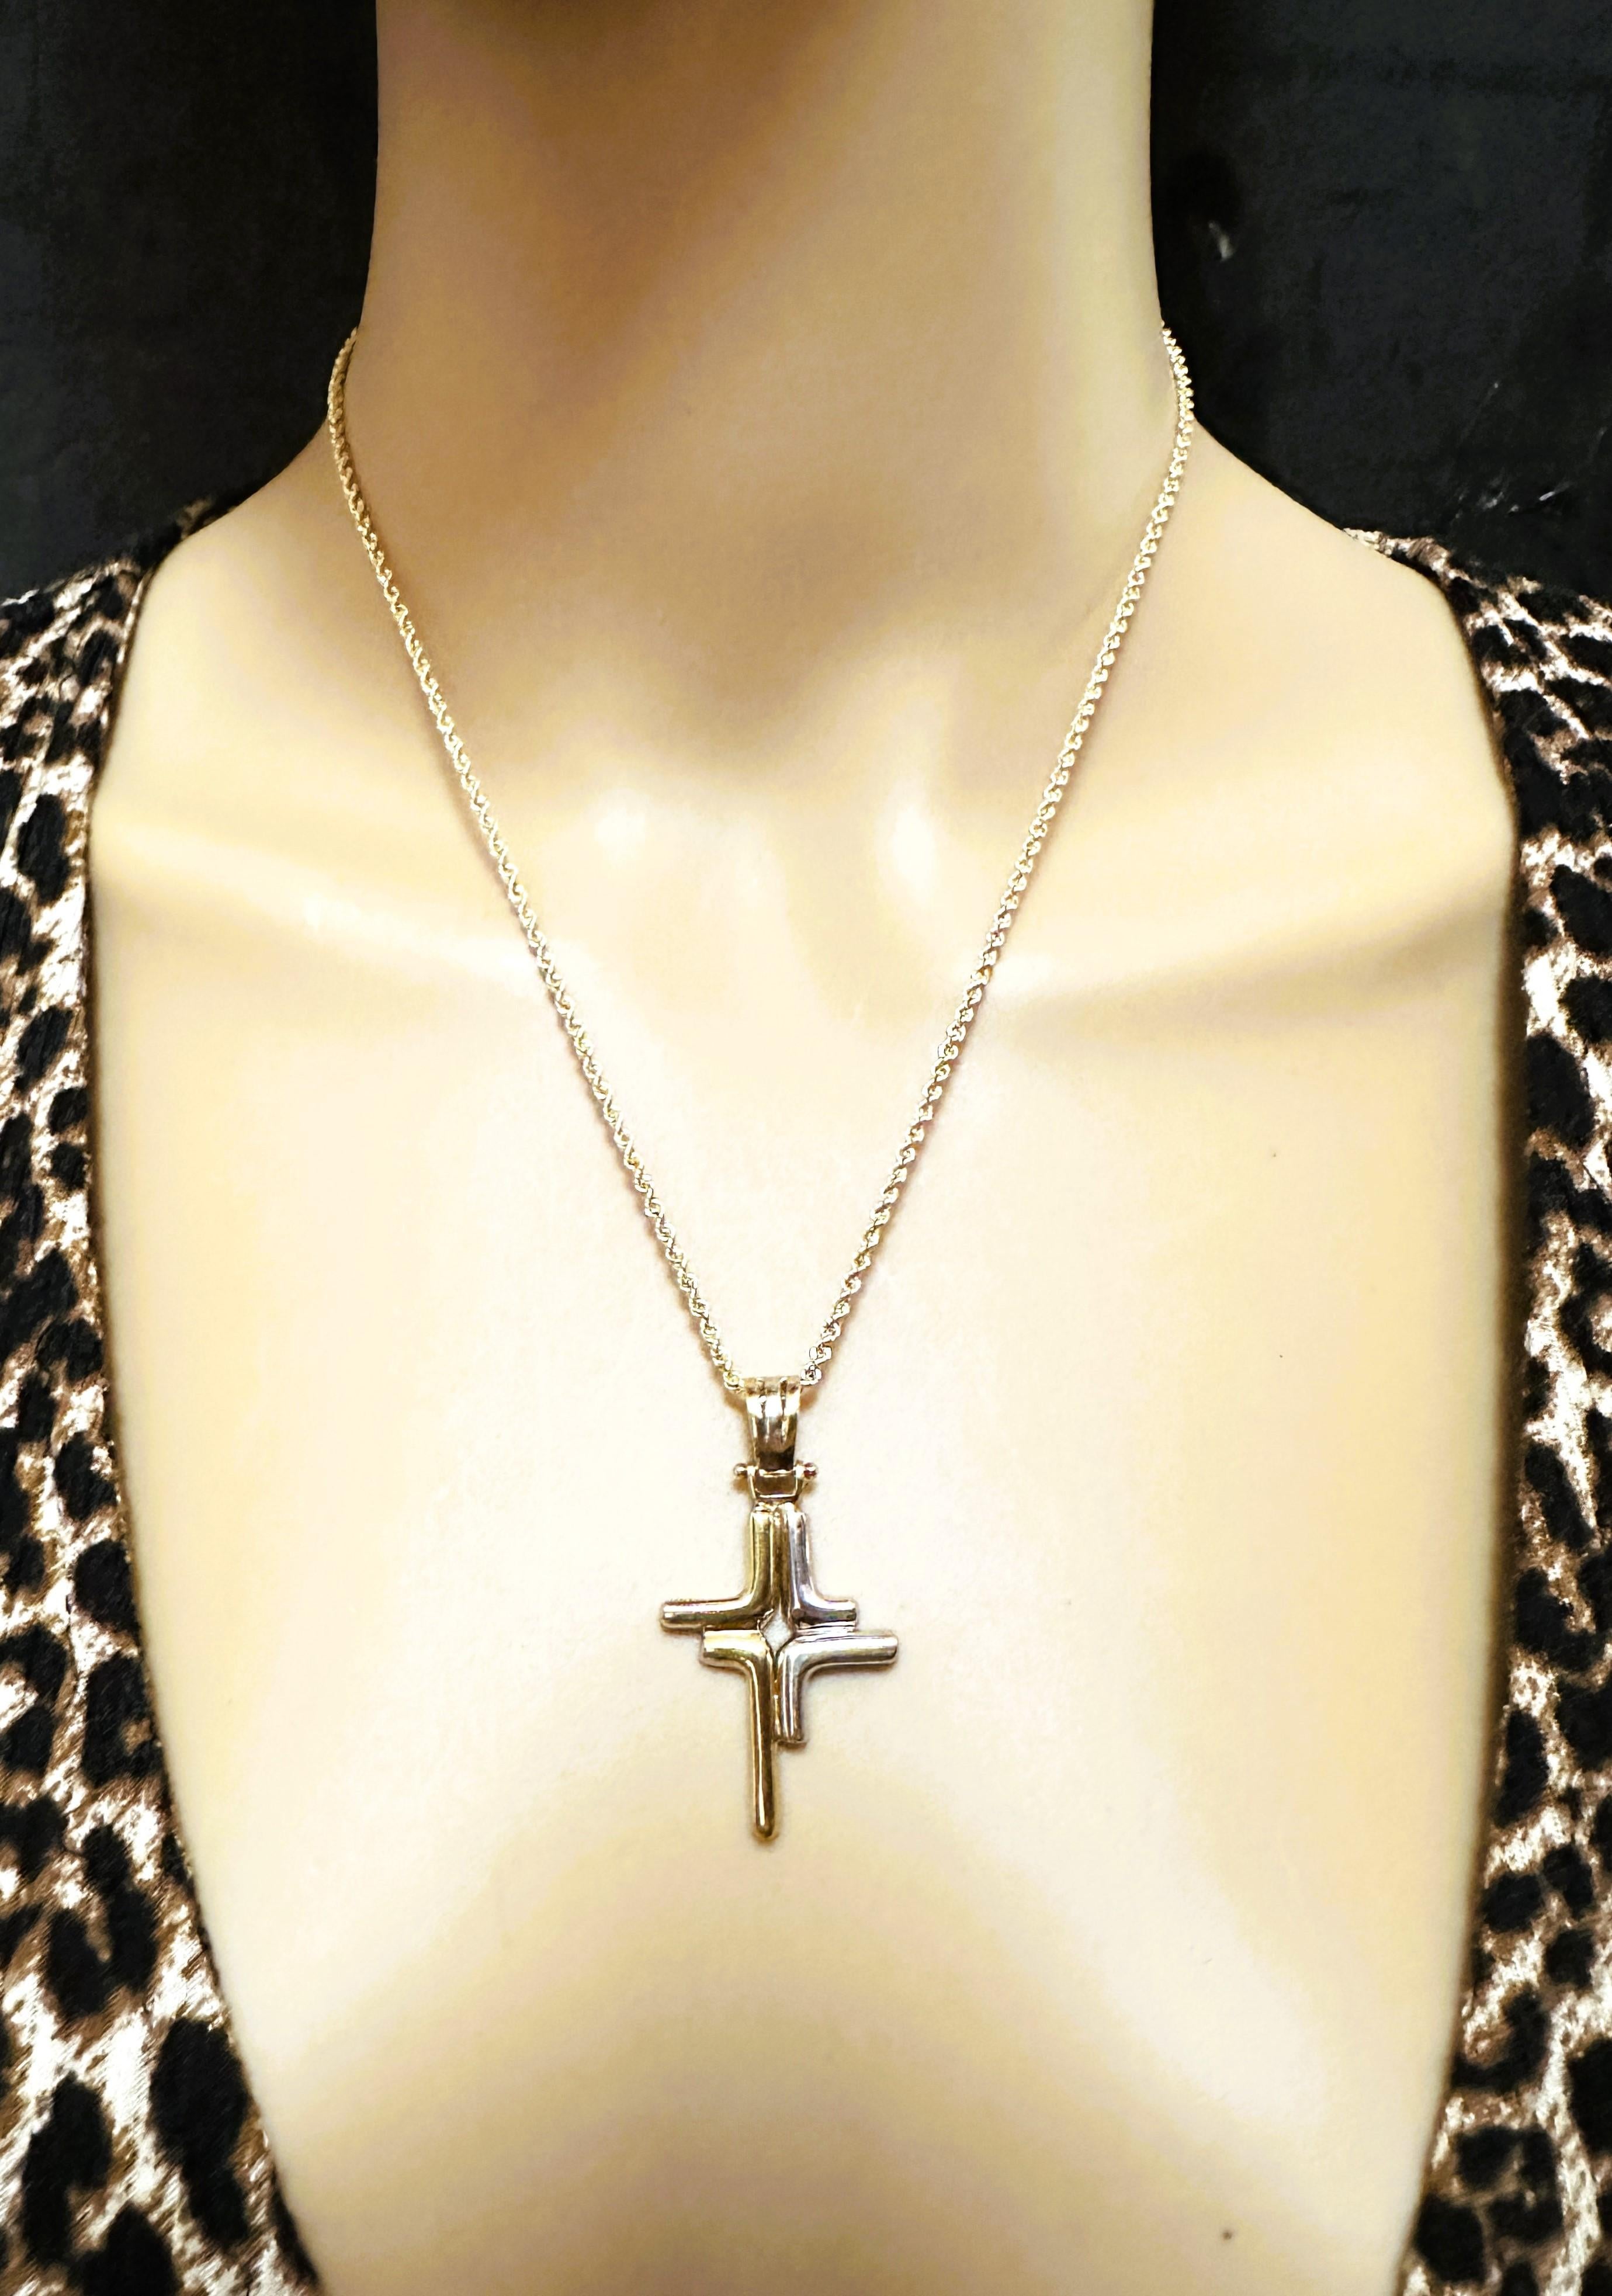 Modernist 18K Yellow and White Gold Modern Cross Pendant with 14k Yellow Gold Chain 18.5